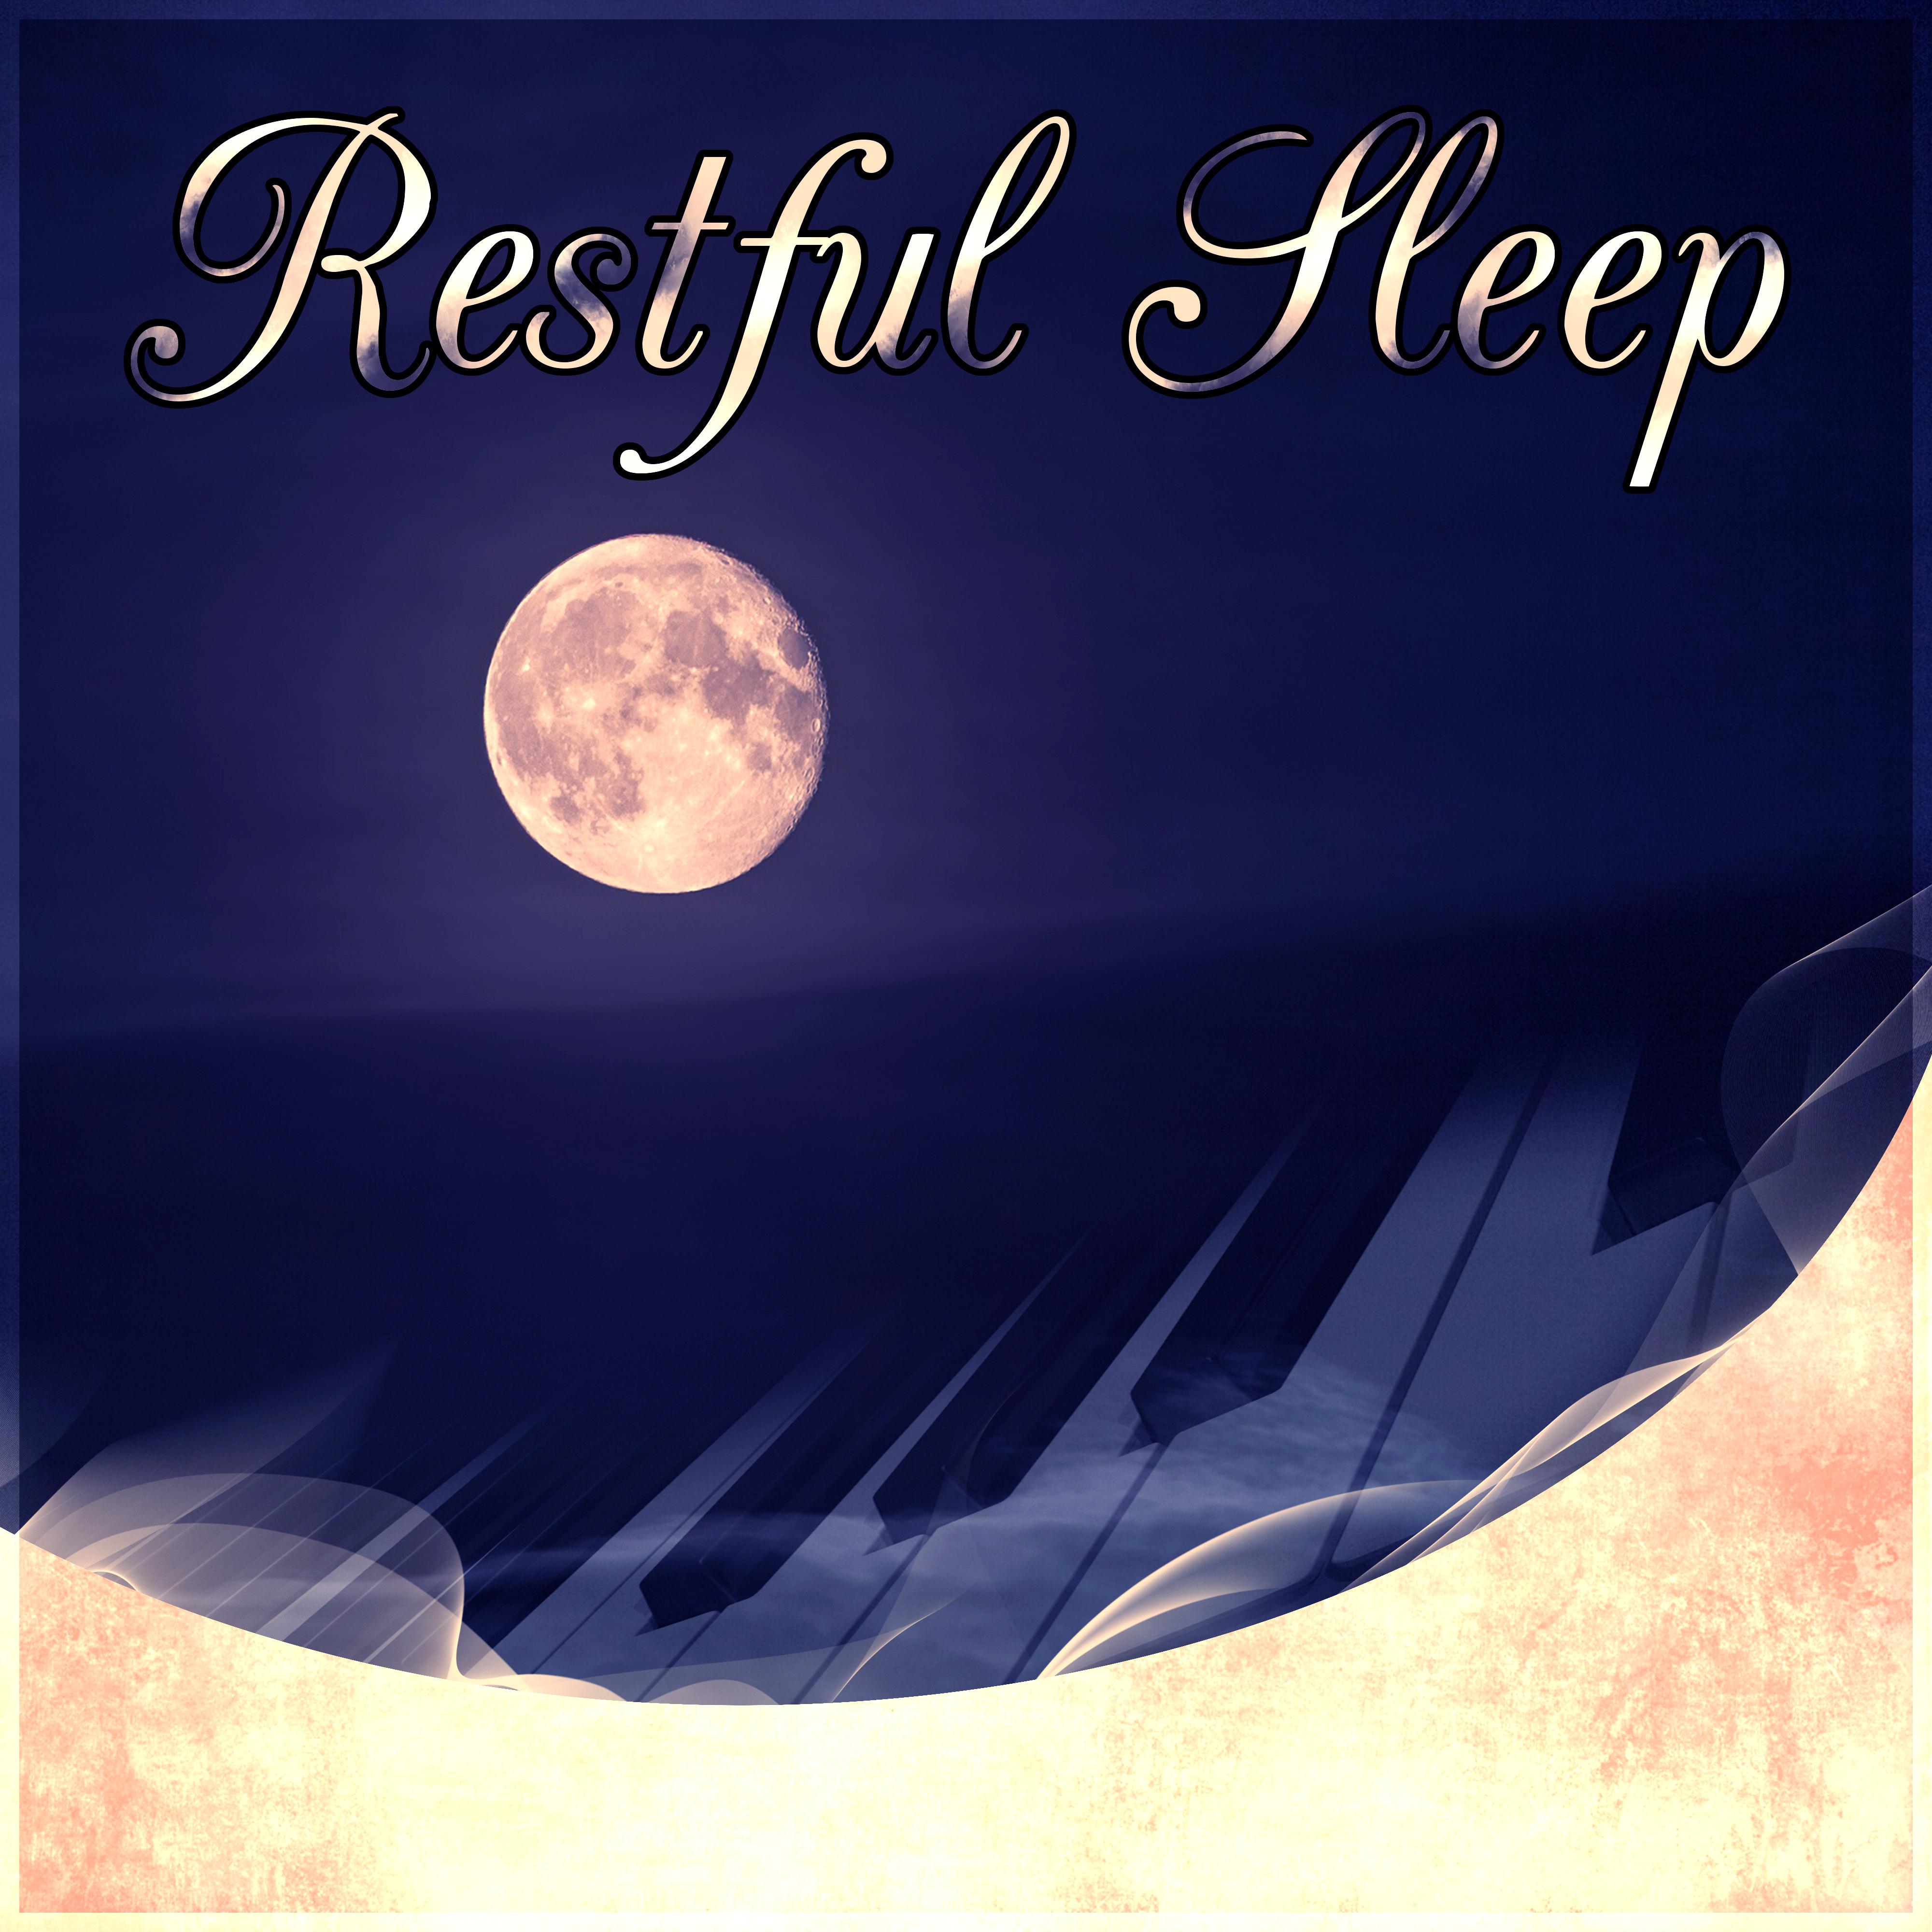 Restful Sleep - Sleep Music to Help You Fall Asleep Easily, Natural Music for Healing Through Sound and Touch, Sentimental Journey with Sounds of Nature, Massage, Reiki, Luxury Spa